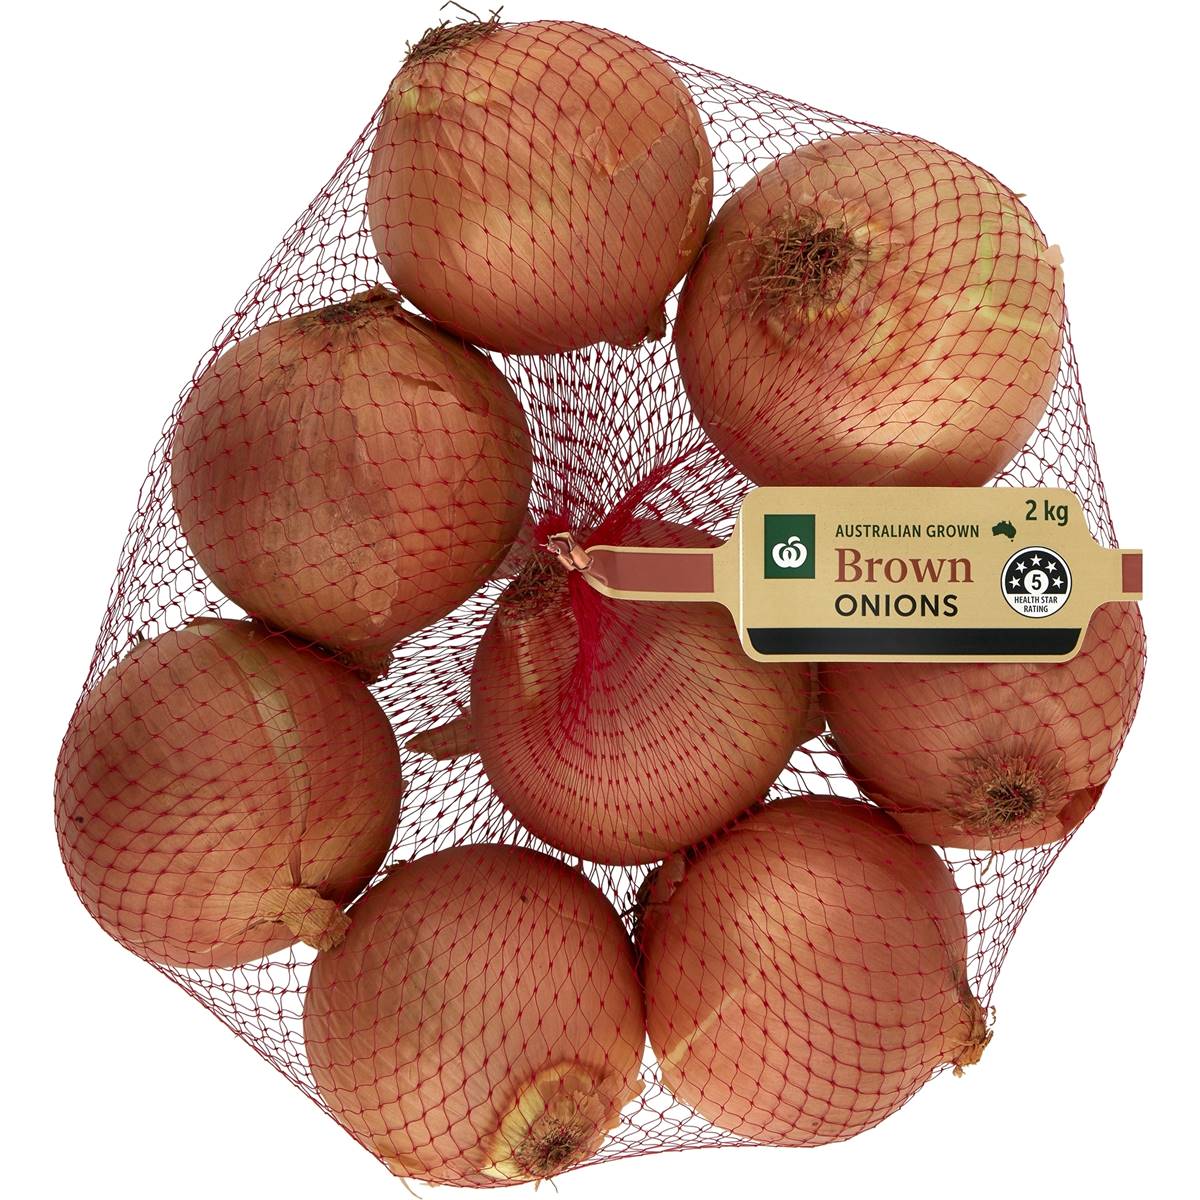 Calories in Woolworths Brown Onions